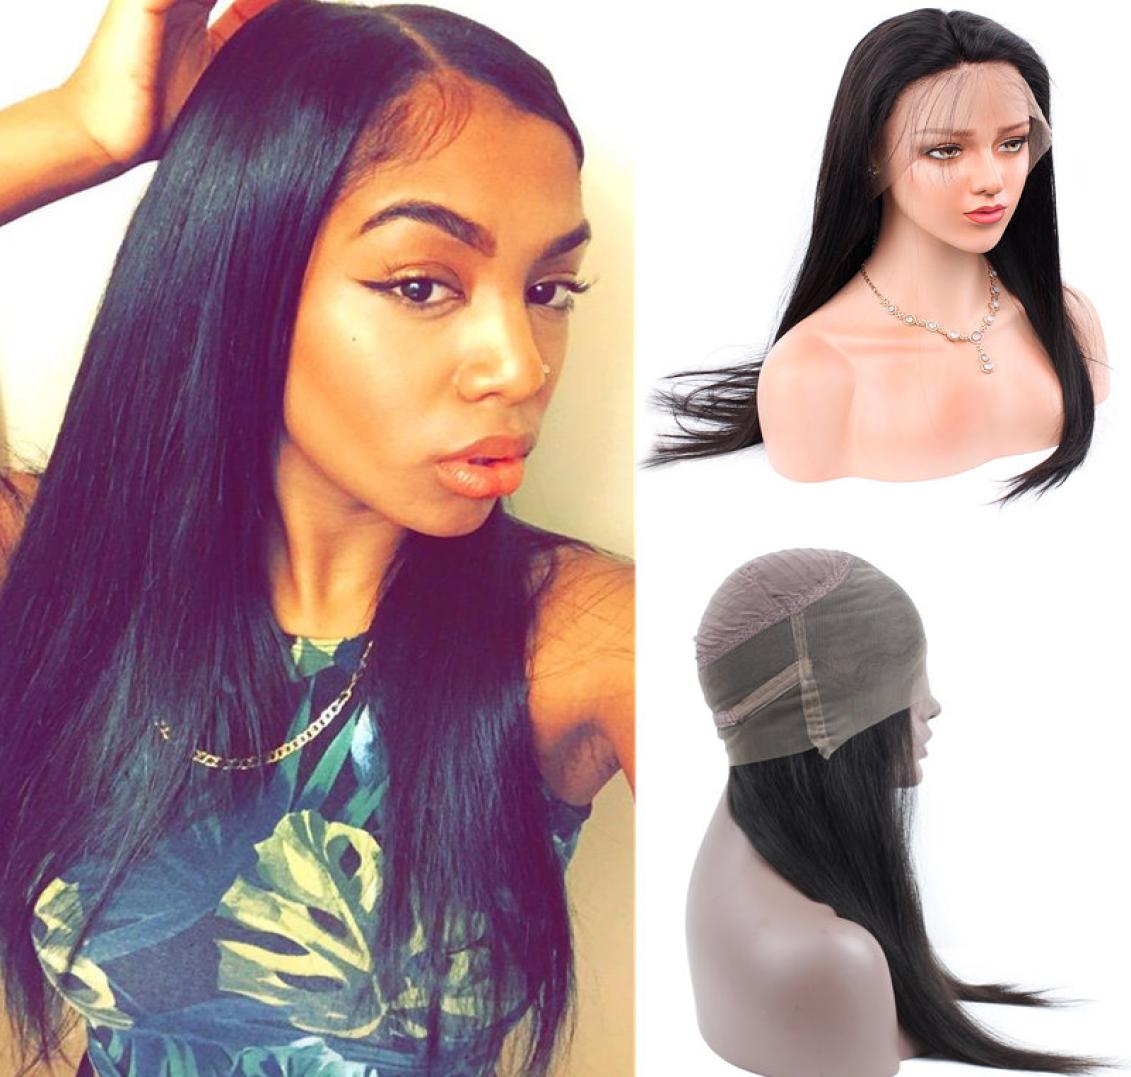 

Malaysiay Human Hair Wigs for Black Women Malaysian Silk Straight 360 Lace Frontal Wigs with Baby Hair Lace Human Hair Wigs9443318, Natural color